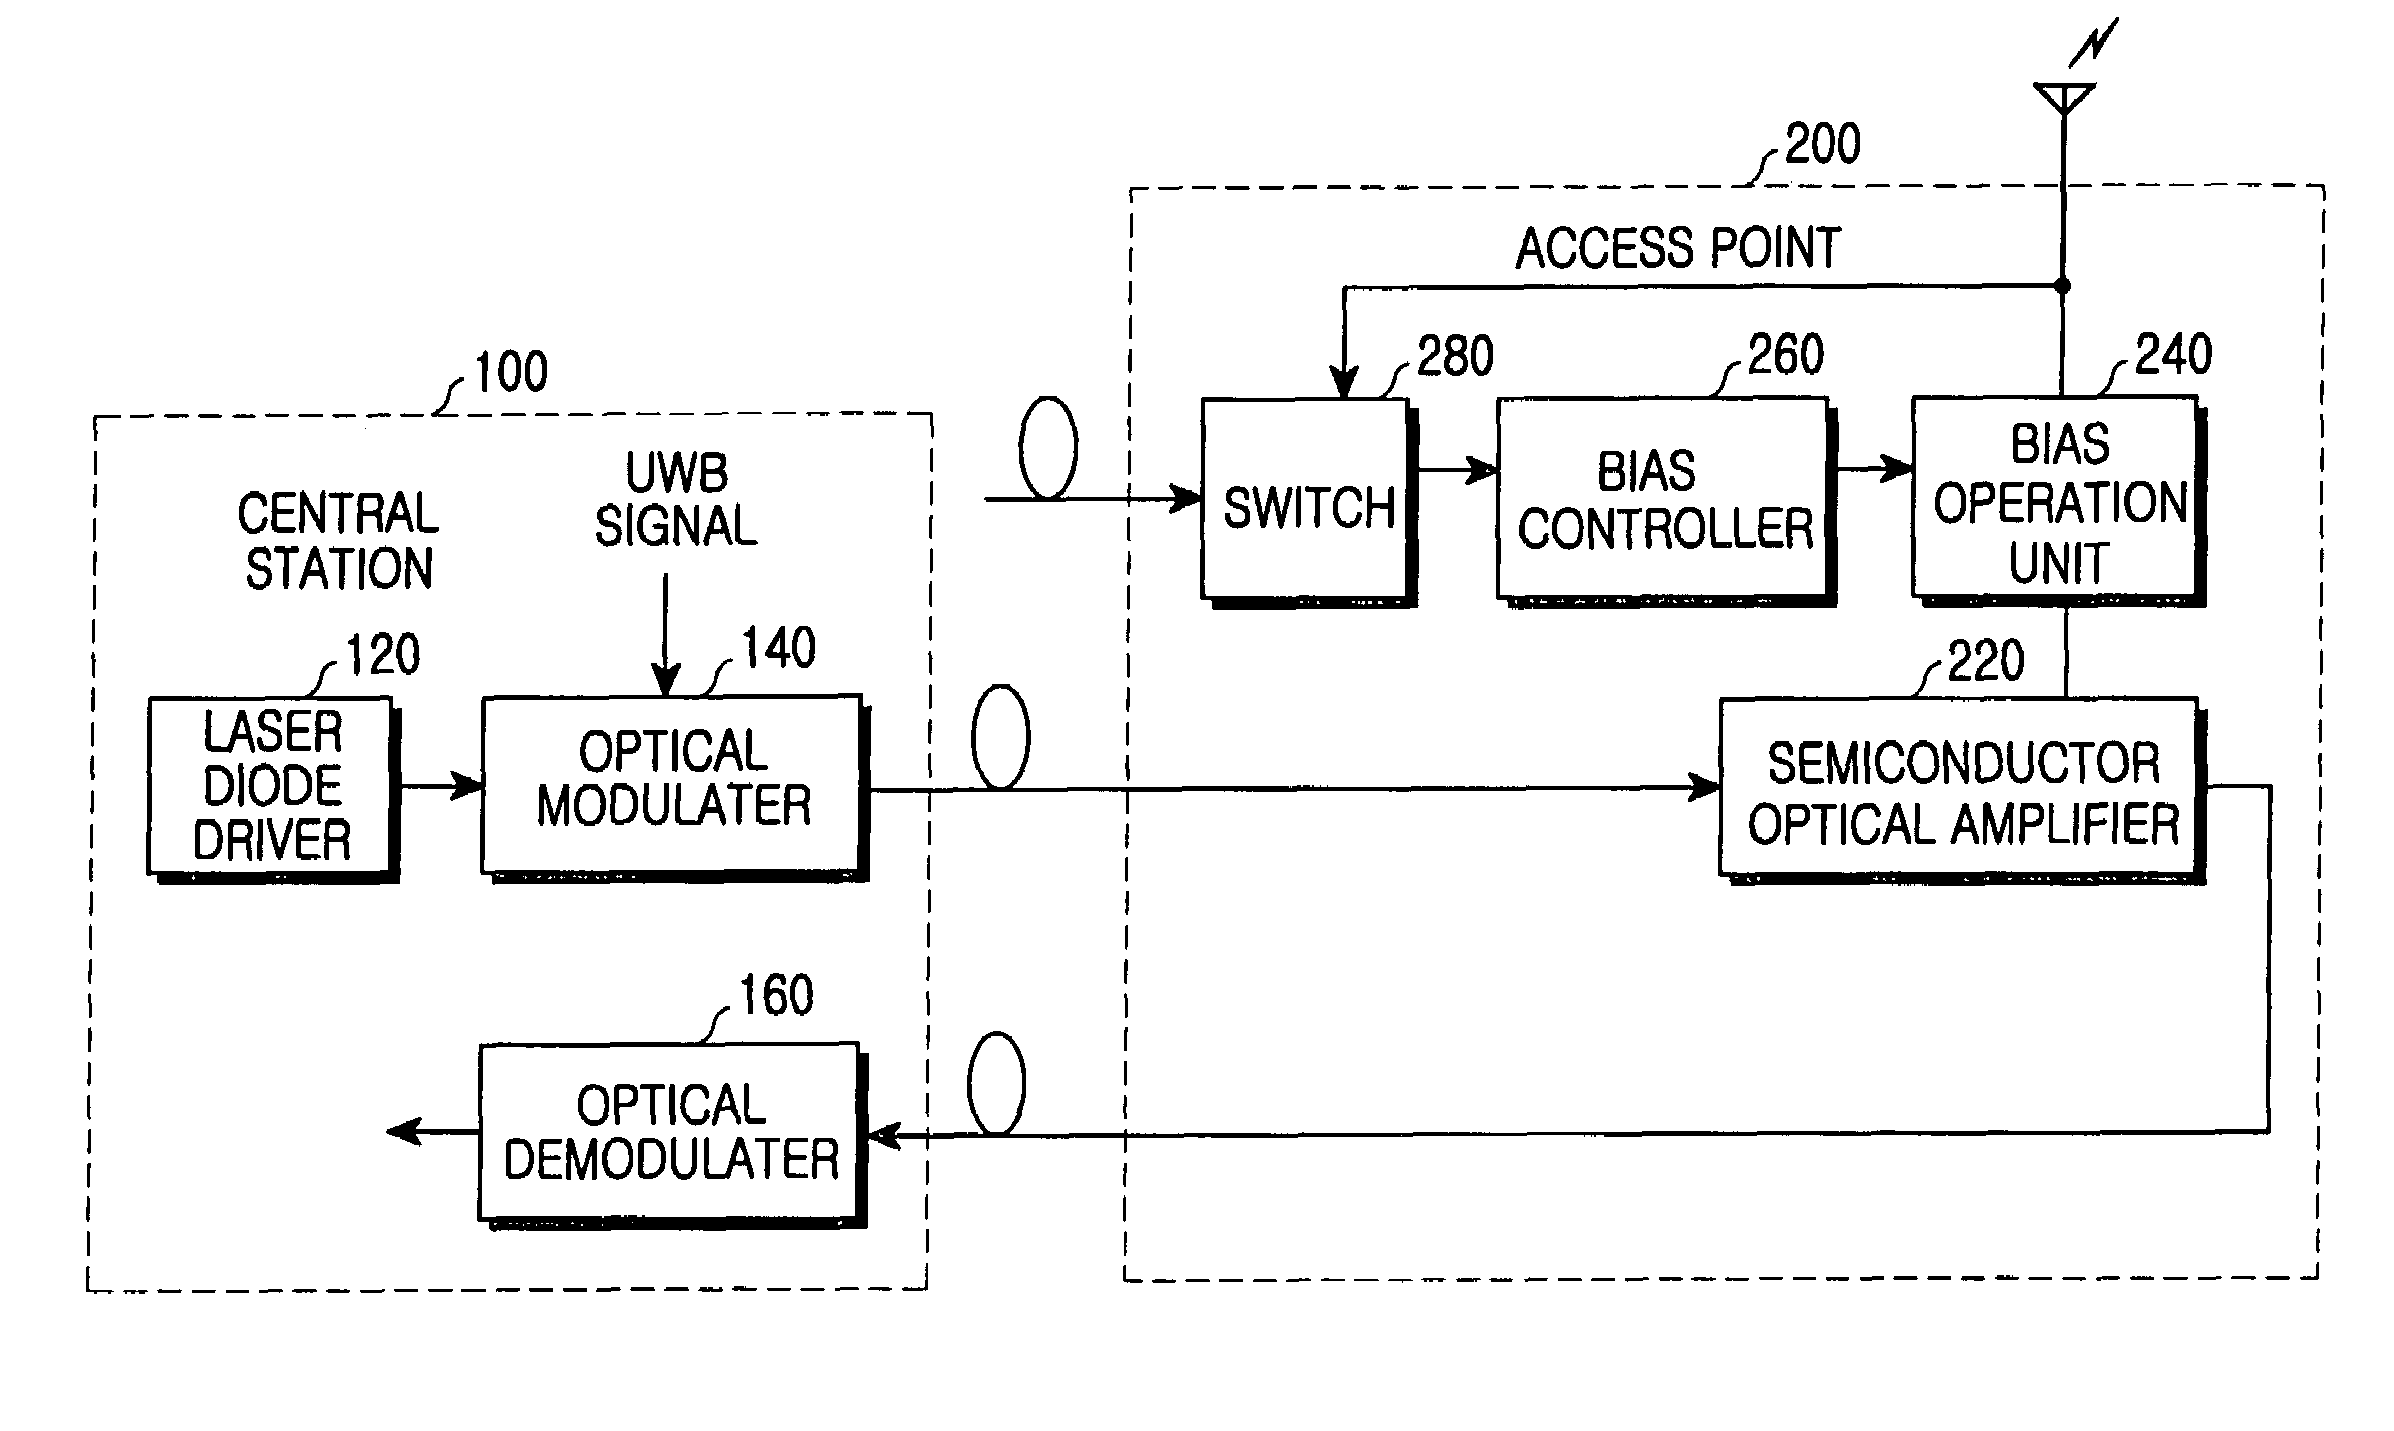 Access point for constructing optical fiber-based high-speed wireless network system